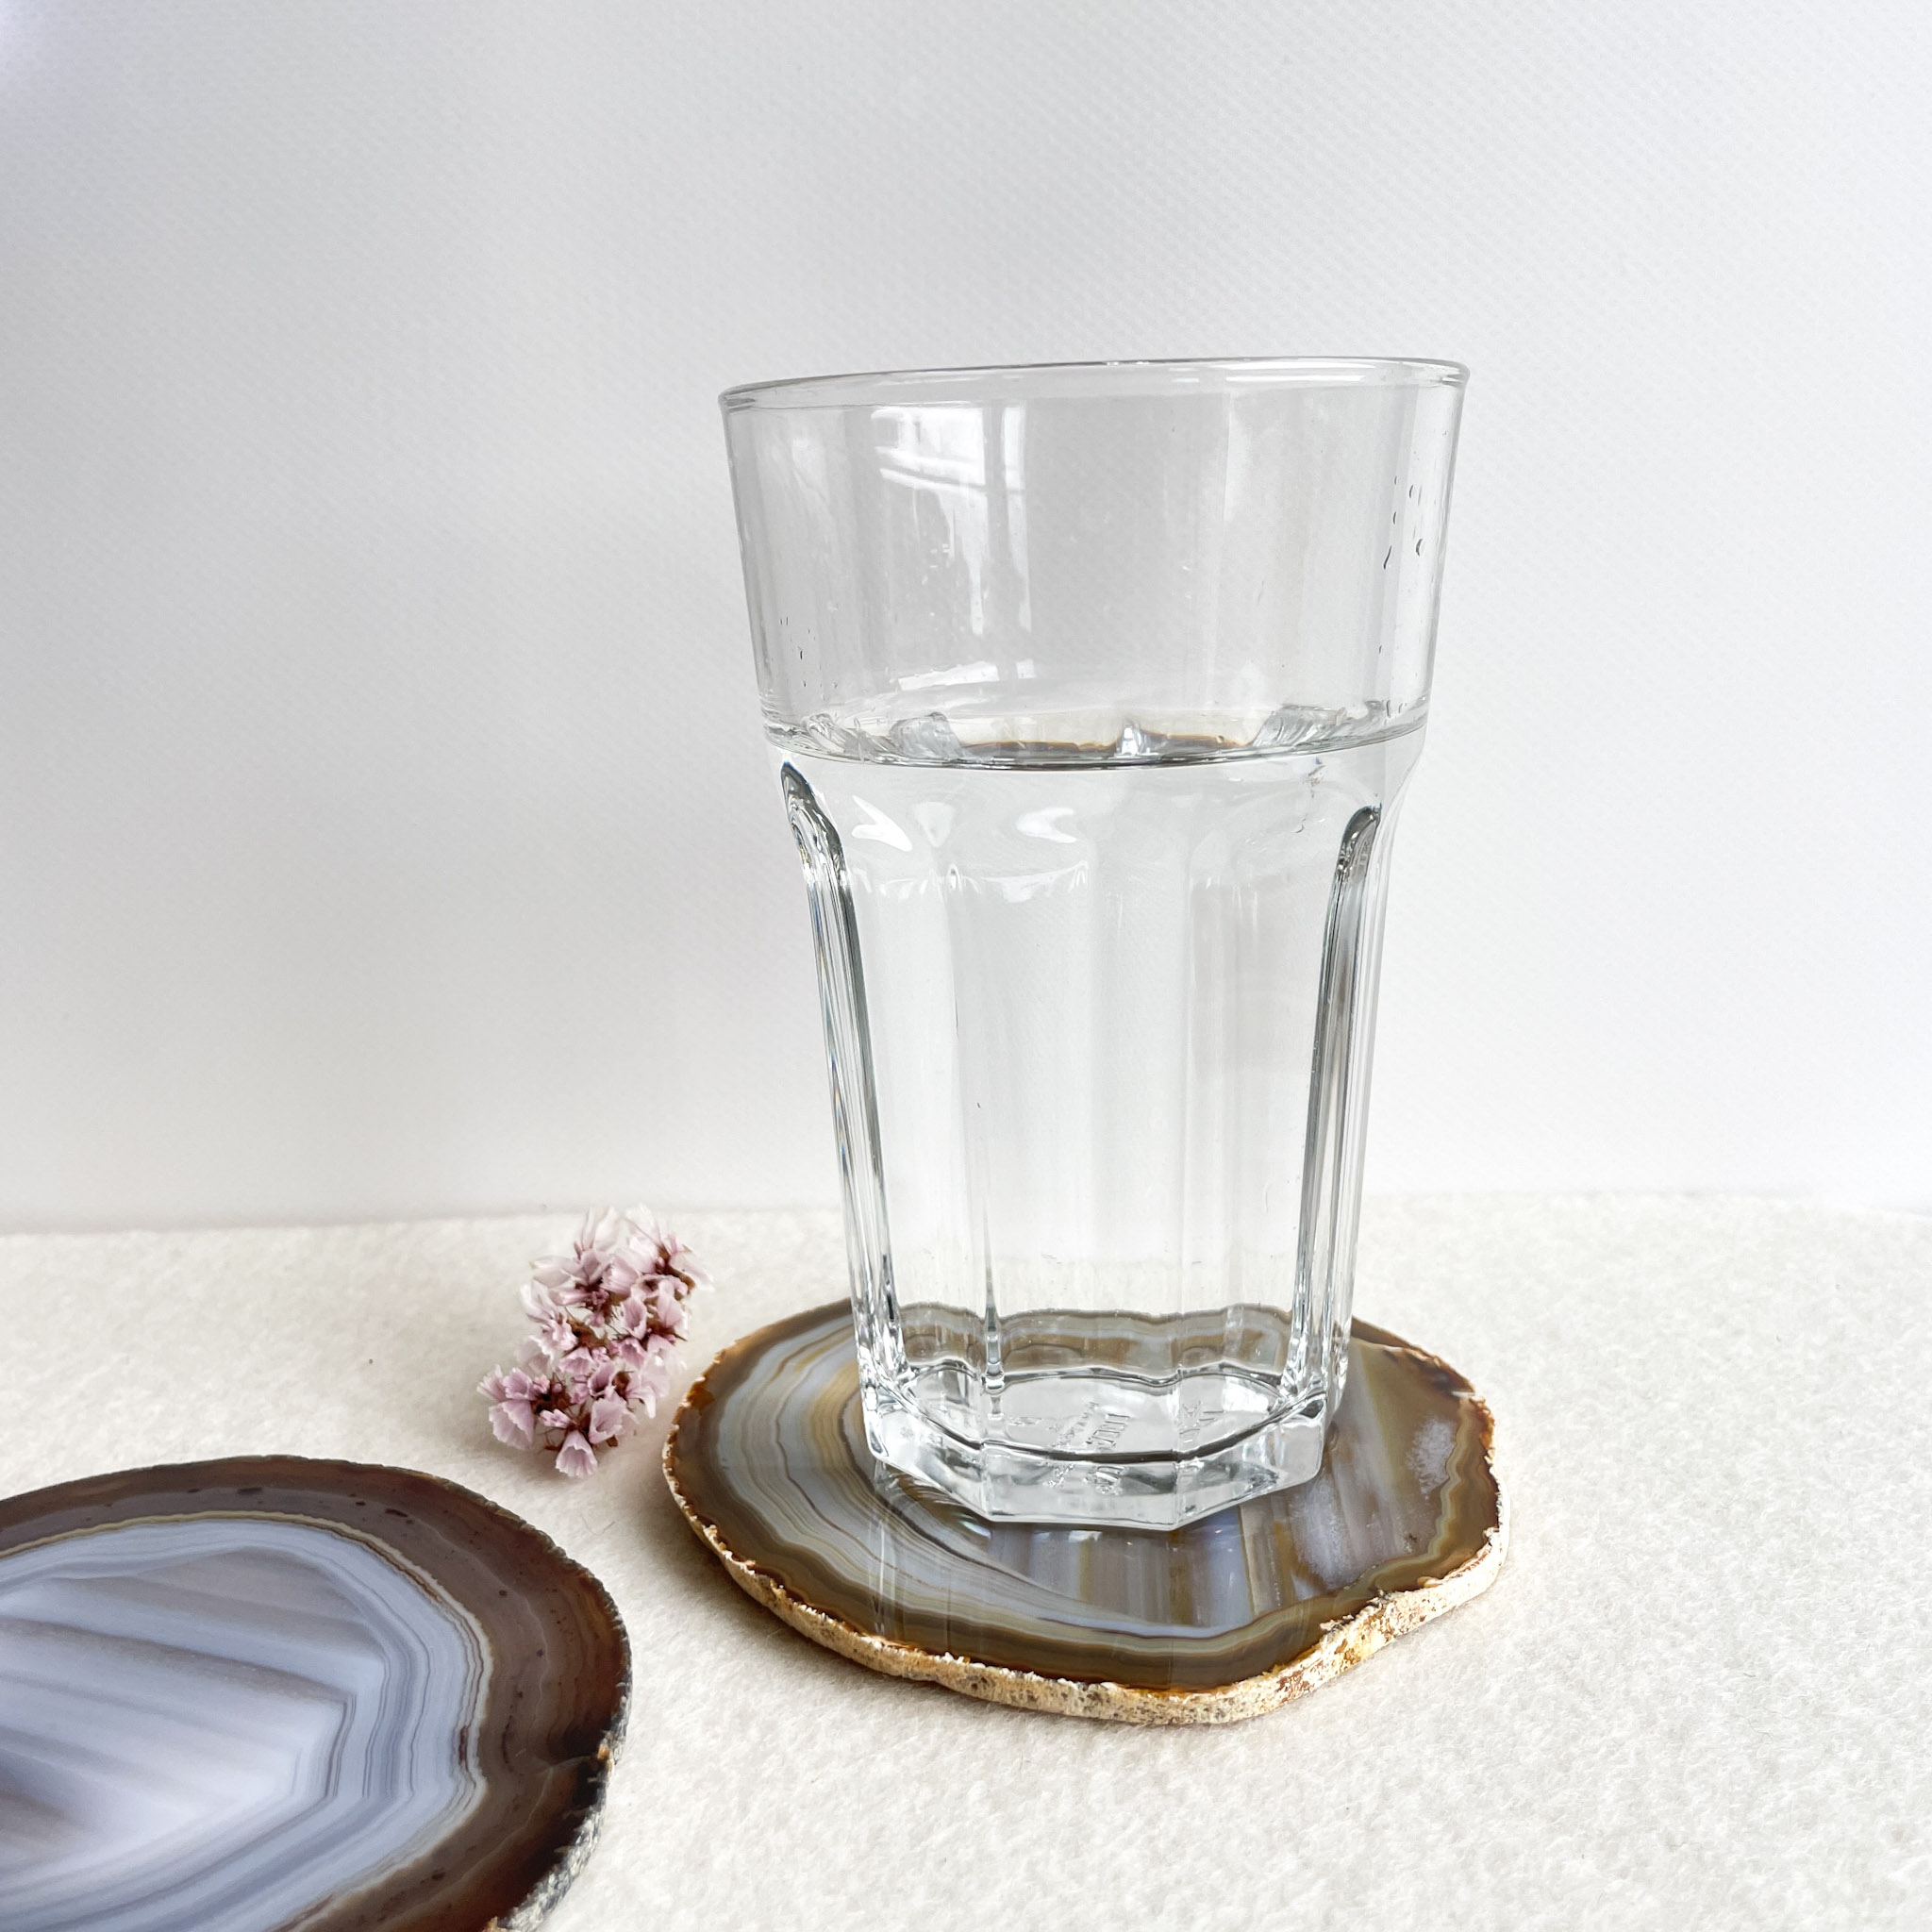 A clear glass of water on a white surface with a small pink flower beside it, resting on a coaster made of a cross-section of an agate stone with gold edging.